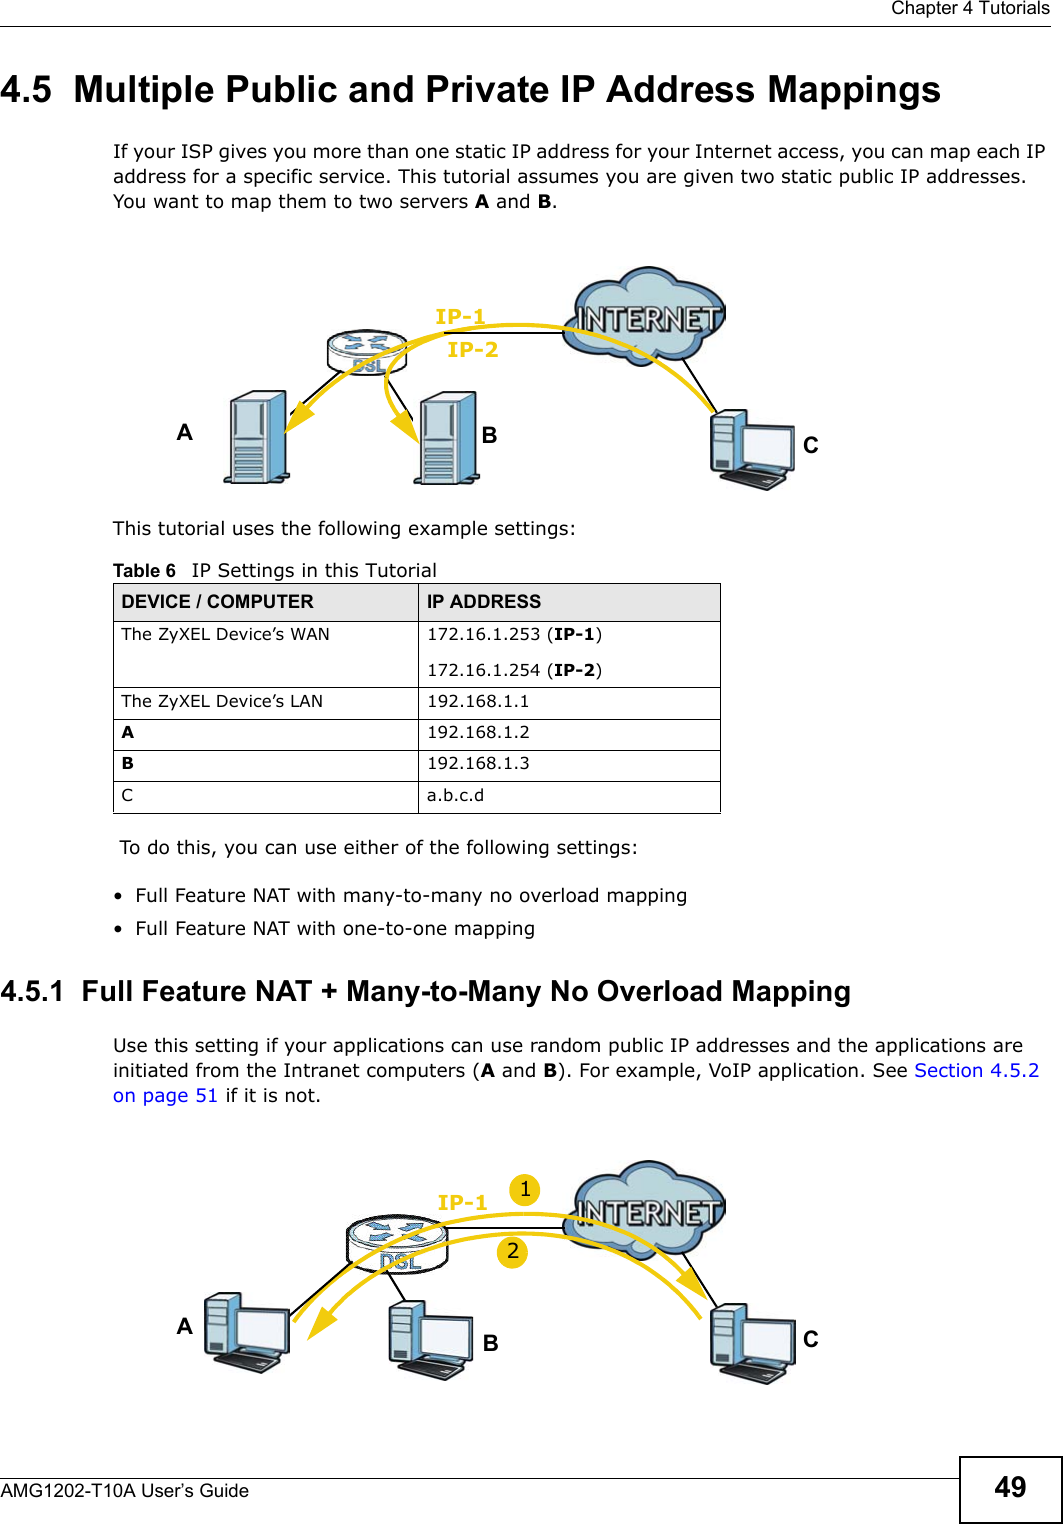  Chapter 4 TutorialsAMG1202-T10A User’s Guide 494.5  Multiple Public and Private IP Address MappingsIf your ISP gives you more than one static IP address for your Internet access, you can map each IP address for a specific service. This tutorial assumes you are given two static public IP addresses. You want to map them to two servers A and B.This tutorial uses the following example settings: To do this, you can use either of the following settings:• Full Feature NAT with many-to-many no overload mapping• Full Feature NAT with one-to-one mapping4.5.1  Full Feature NAT + Many-to-Many No Overload MappingUse this setting if your applications can use random public IP addresses and the applications are initiated from the Intranet computers (A and B). For example, VoIP application. See Section 4.5.2 on page 51 if it is not.Table 6   IP Settings in this TutorialDEVICE / COMPUTER IP ADDRESSThe ZyXEL Device’s WAN 172.16.1.253 (IP-1)172.16.1.254 (IP-2)The ZyXEL Device’s LAN 192.168.1.1A192.168.1.2B192.168.1.3C a.b.c.dABIP-1IP-2CABIP-1C12